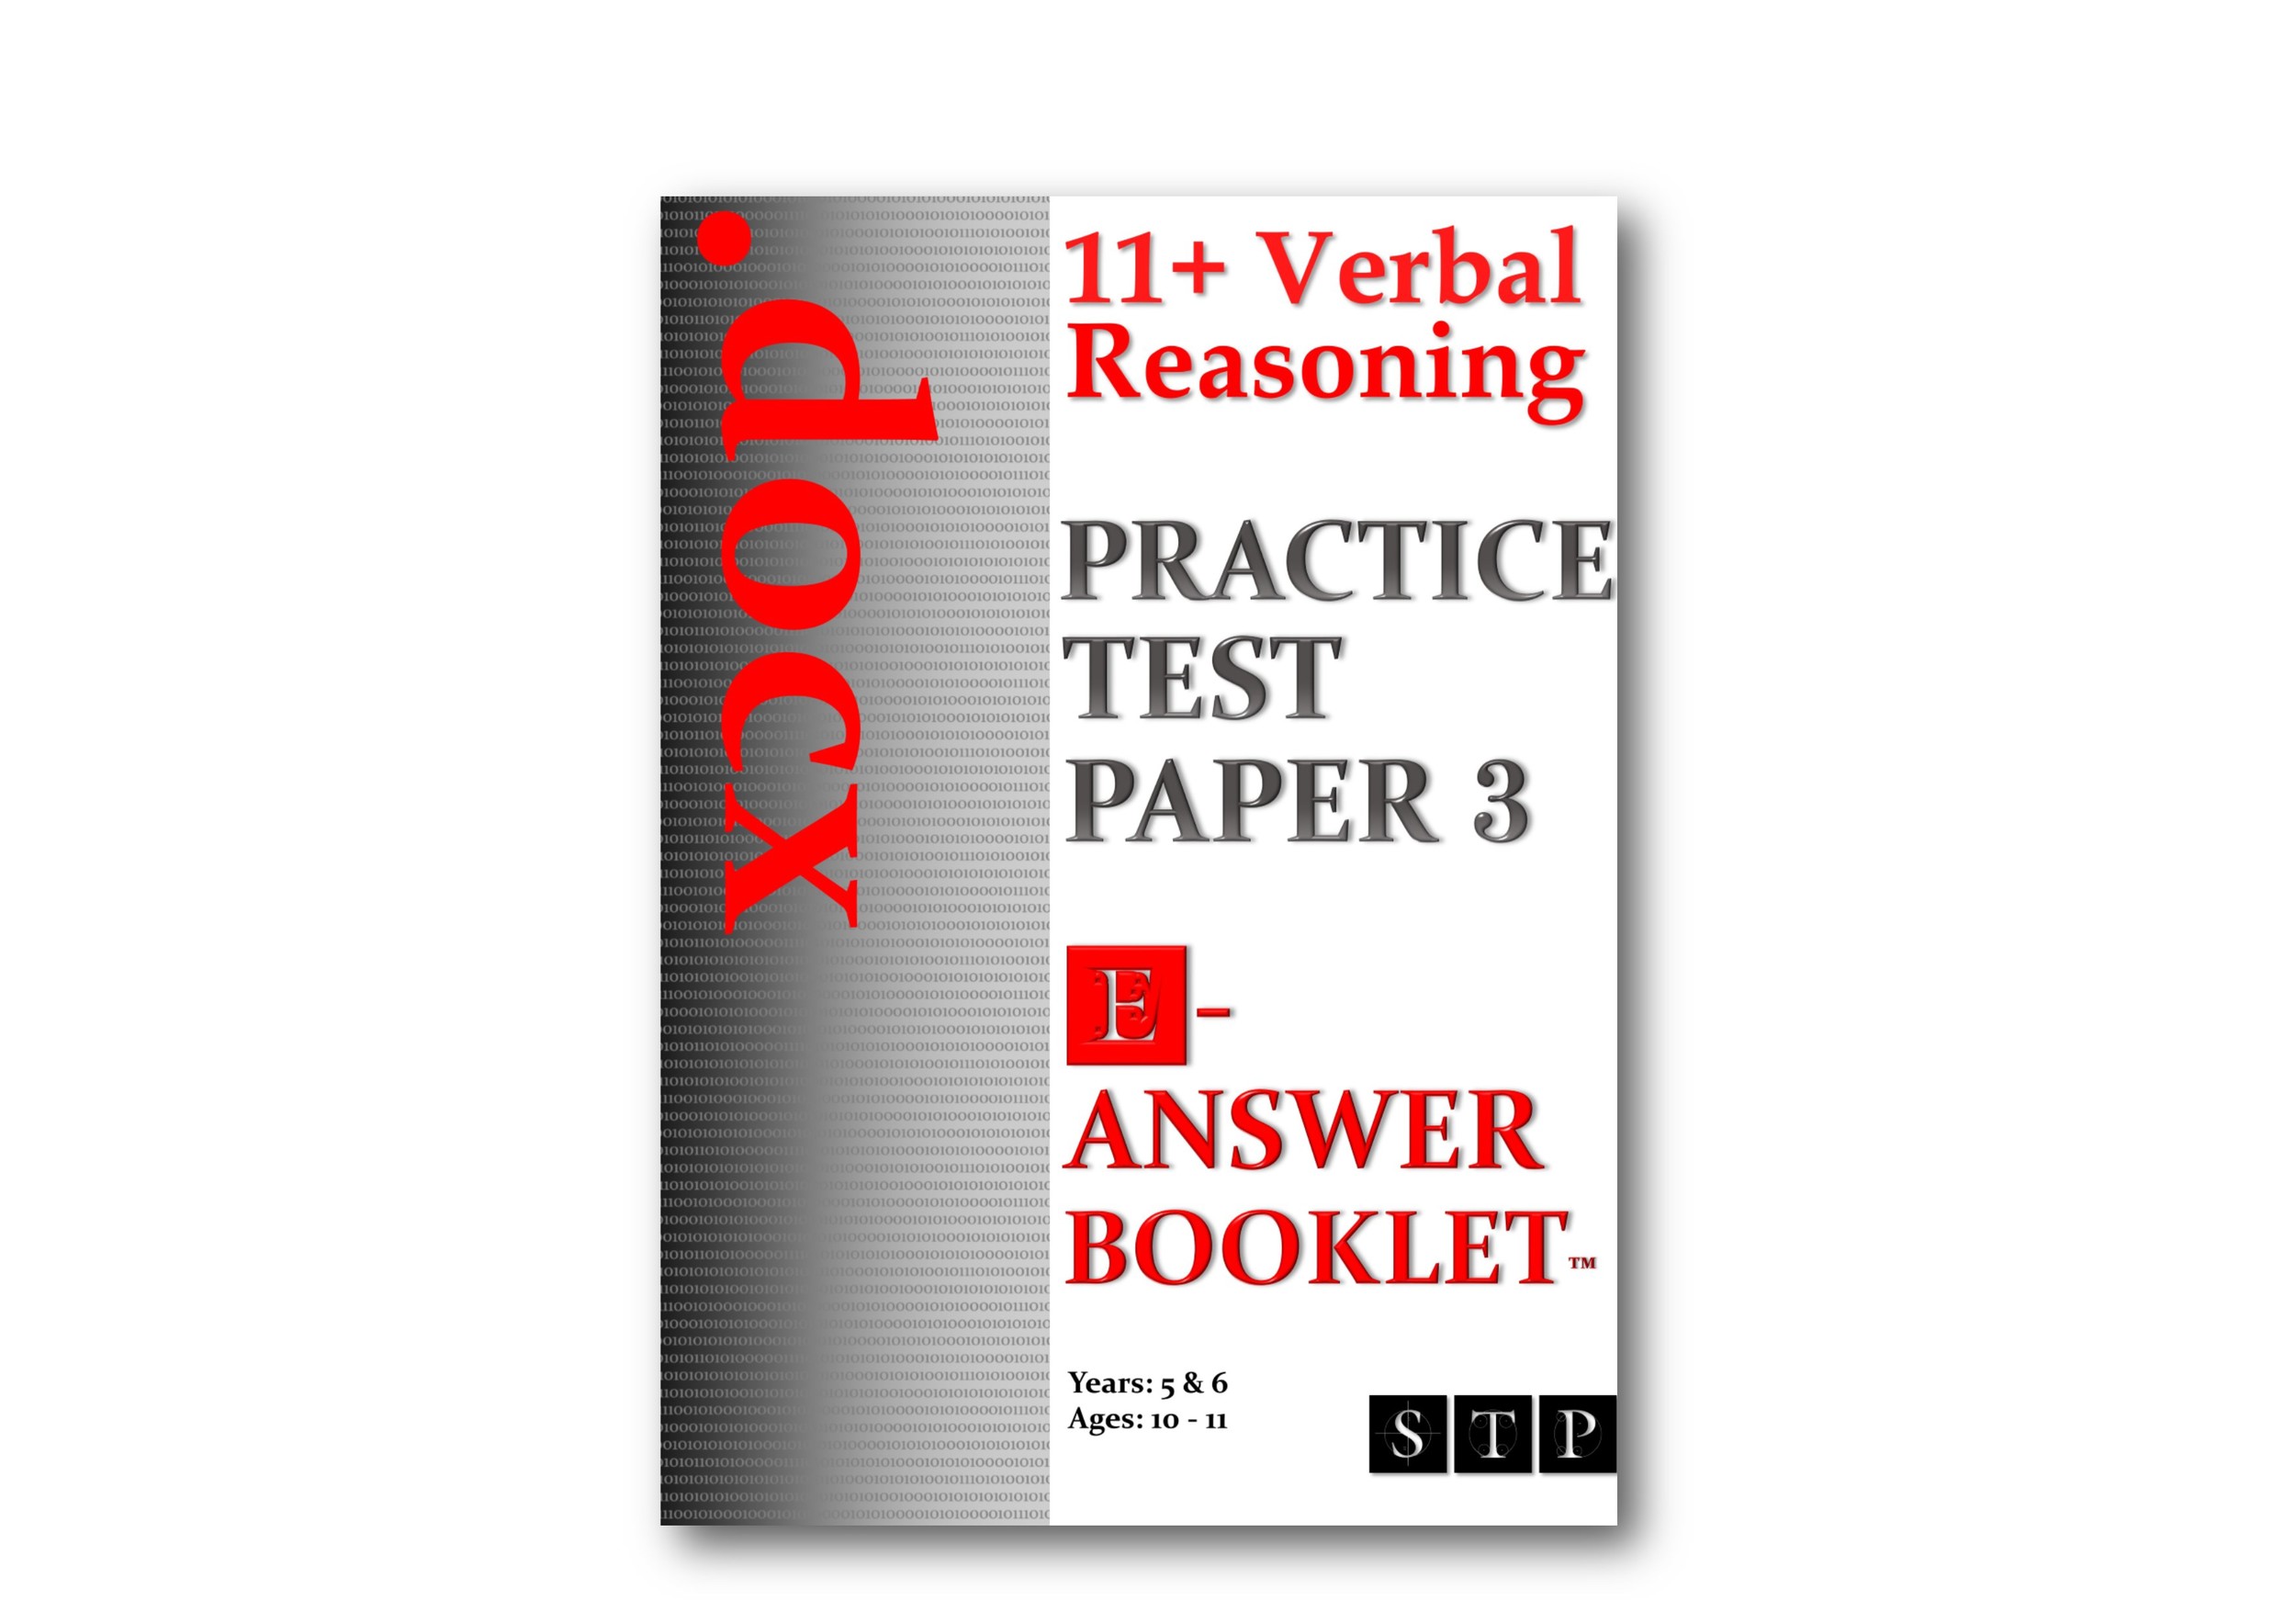 11+ Verbal Reasoning Practice Test Paper 3 (E-Answer Booklet).jpg